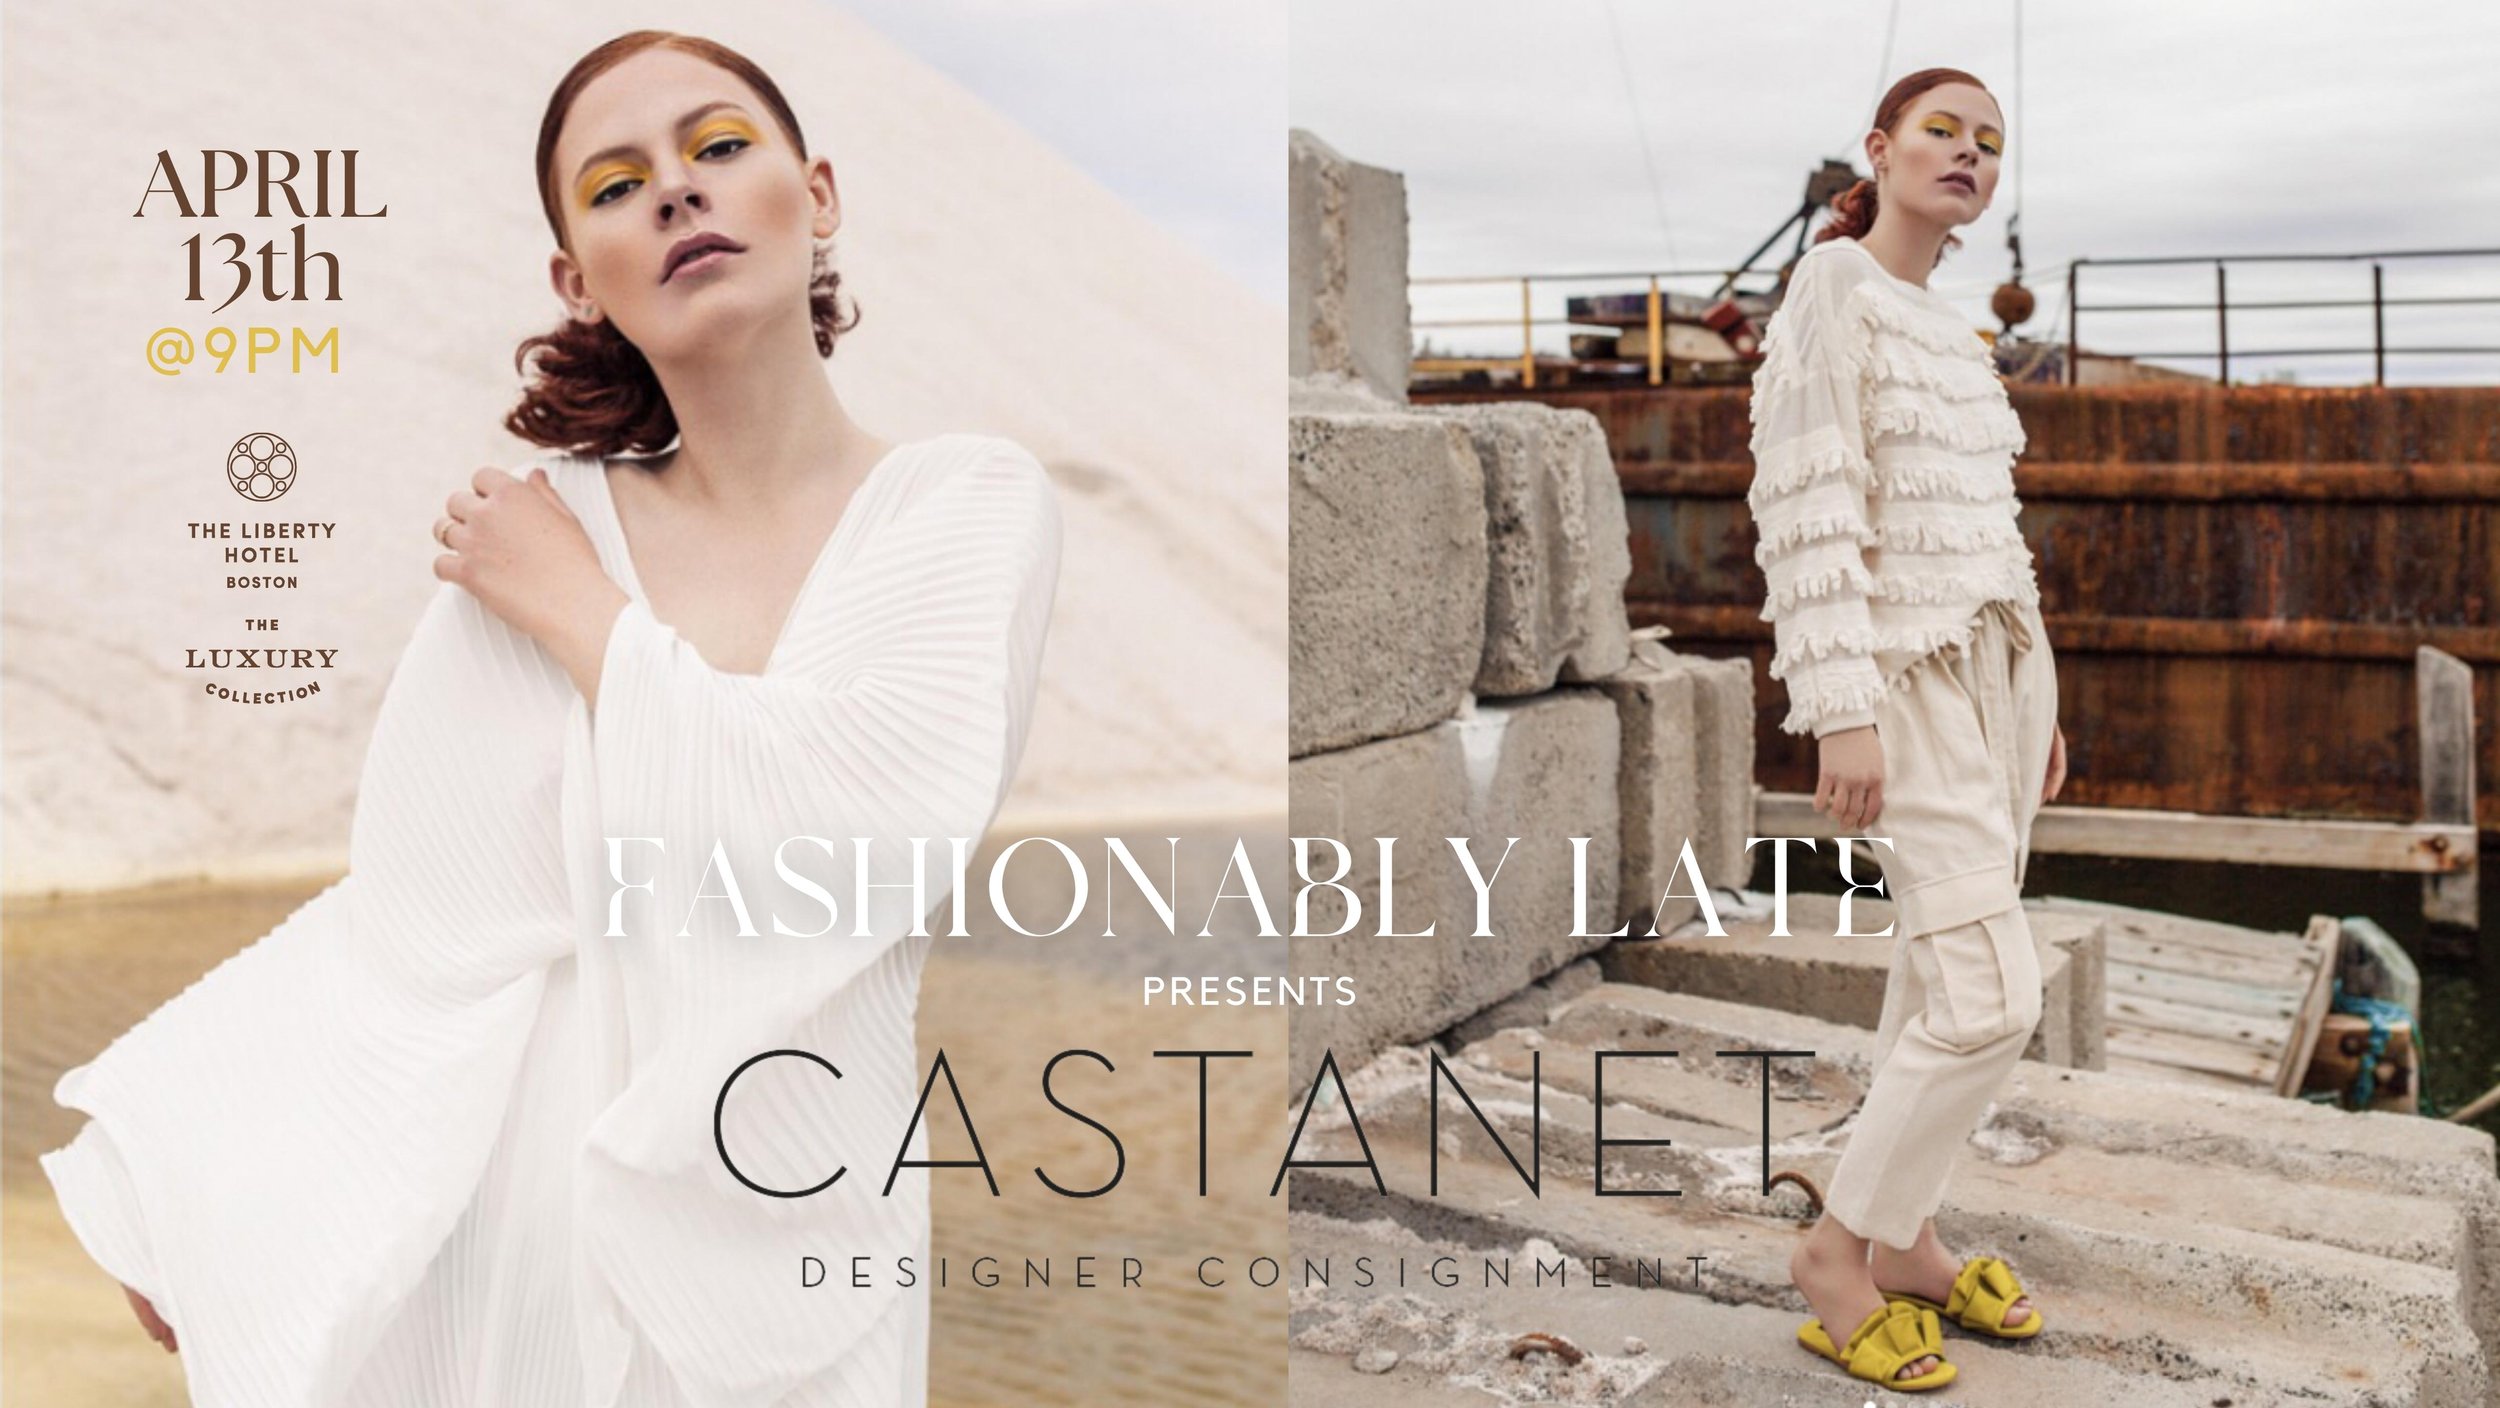 Fashionably LATE x Castanet Designer Consignment — Clink.